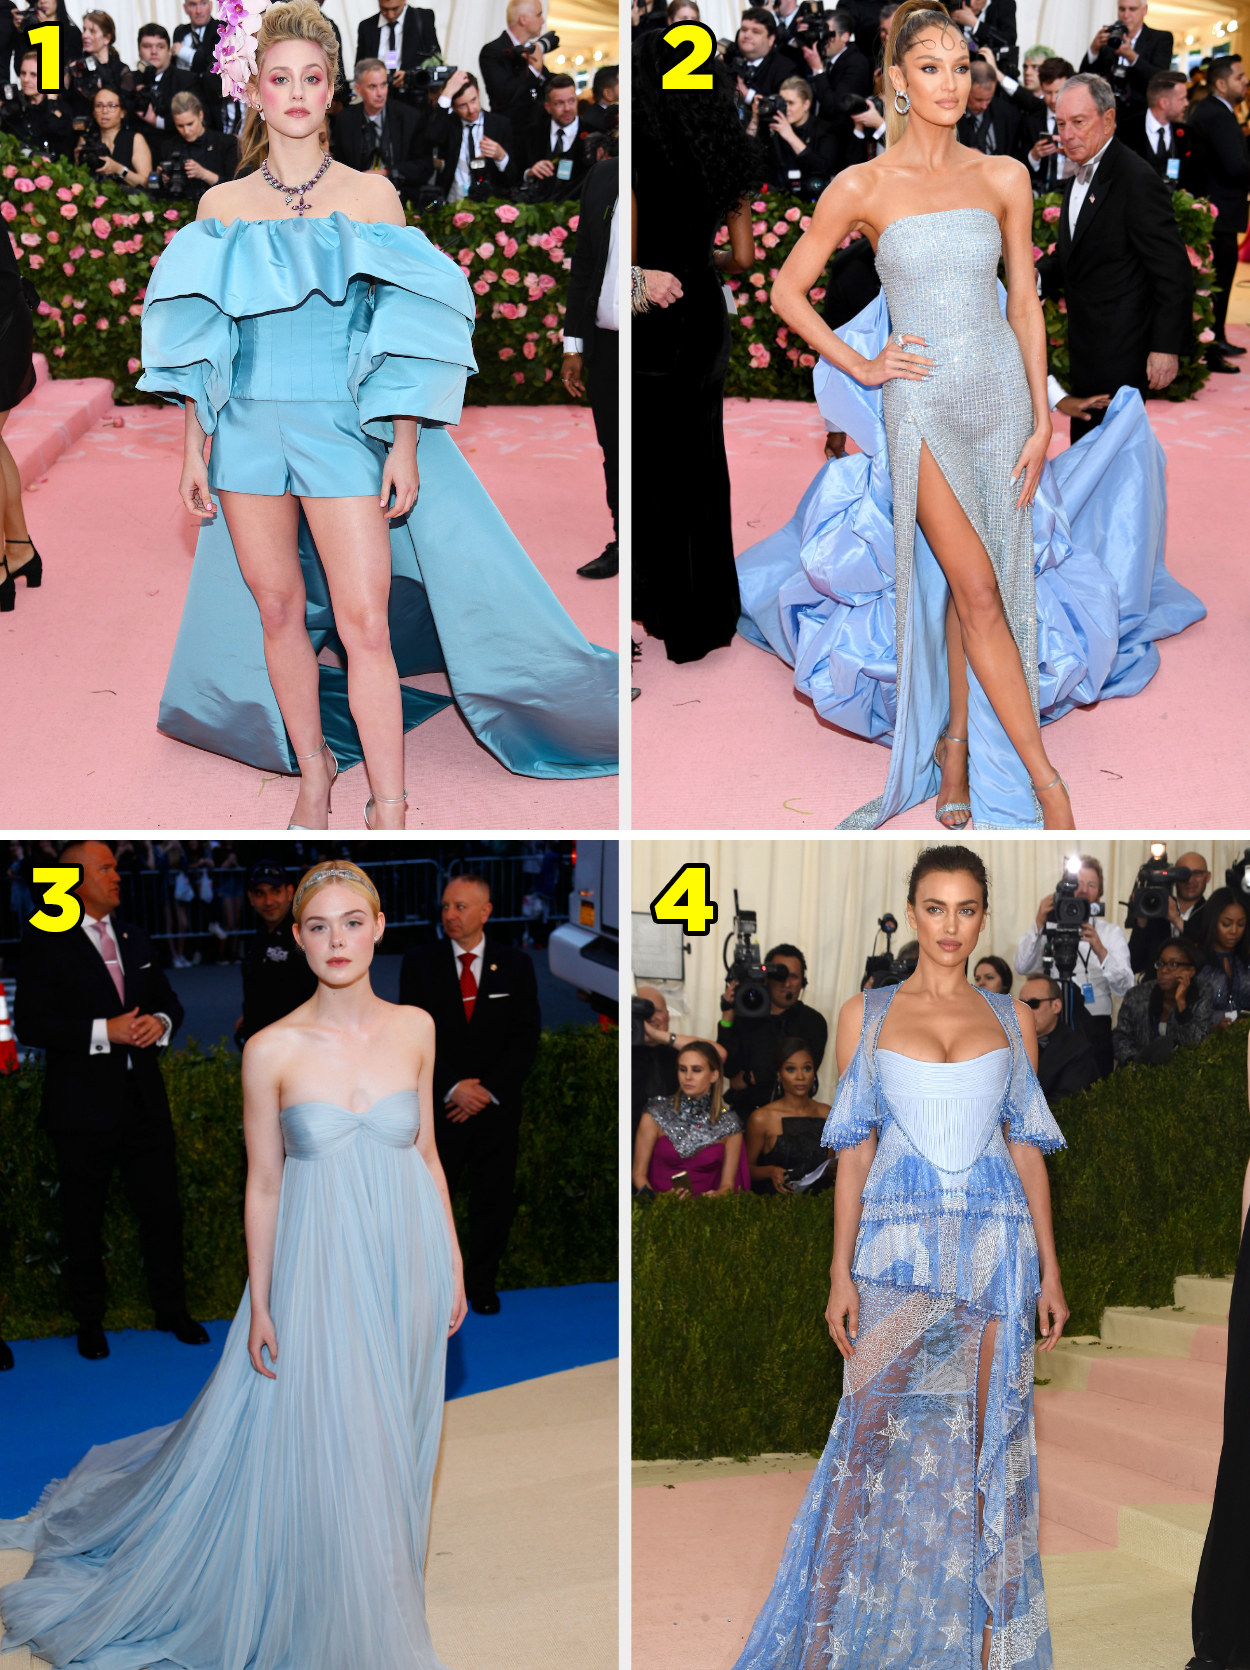 1. A poofy romper with a huge train following behind. 2. A strapless gown with a thigh slit and a poofy bustle 3. A flowy strapless gown. 4. A corsetted gown with cold shoulder sleeves and an american flag pattern.